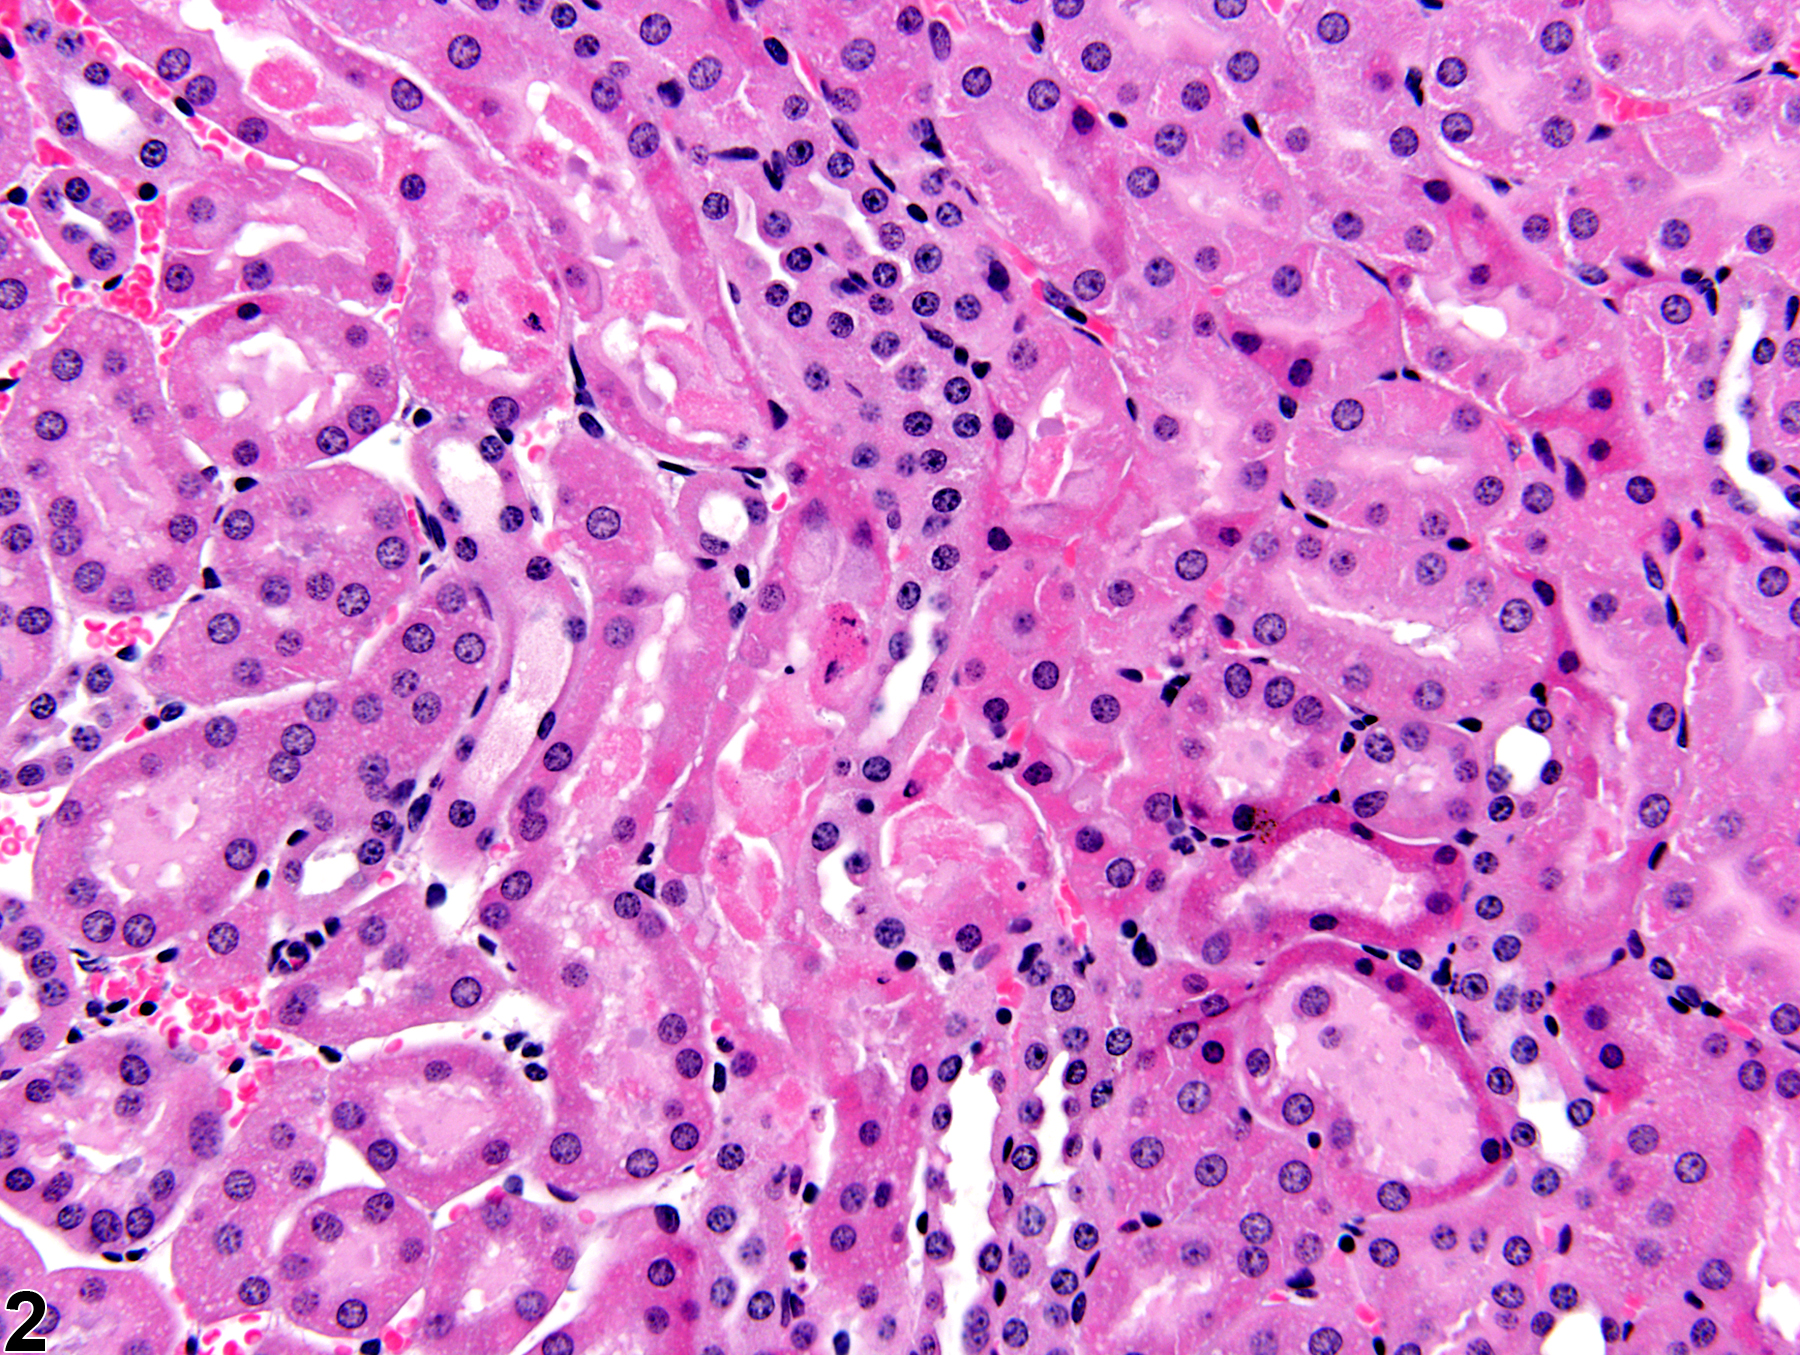 Image of renal tubule necrosis in the kidney from a male B6C3F1 mouse in a subchronic study